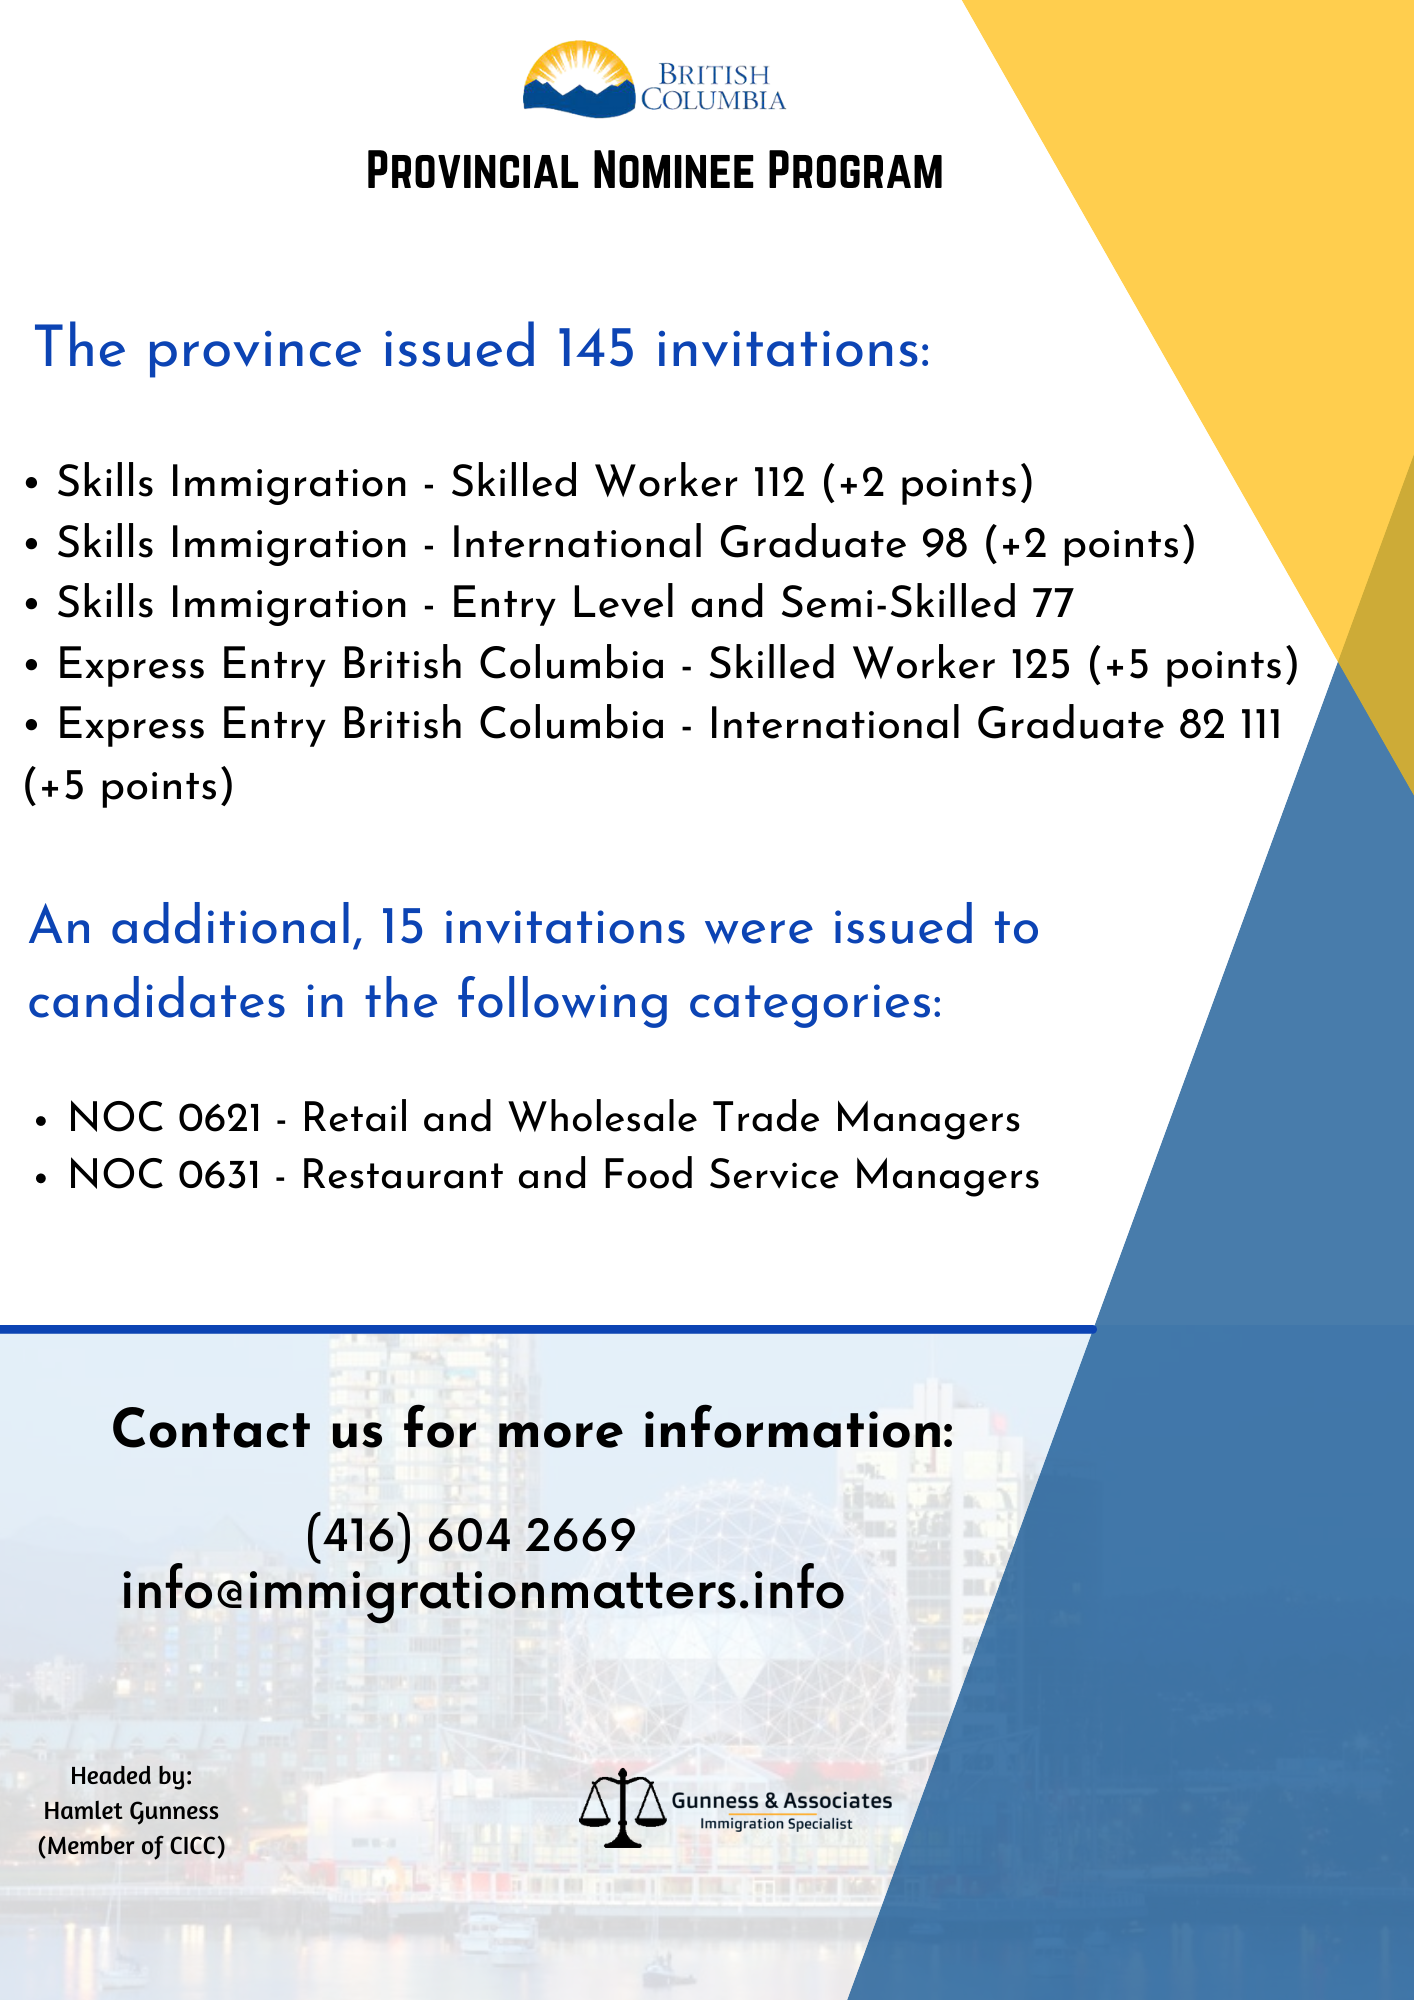 British Columbia issued 160 invitations in the new SI and EEBC of the BCPNP draws